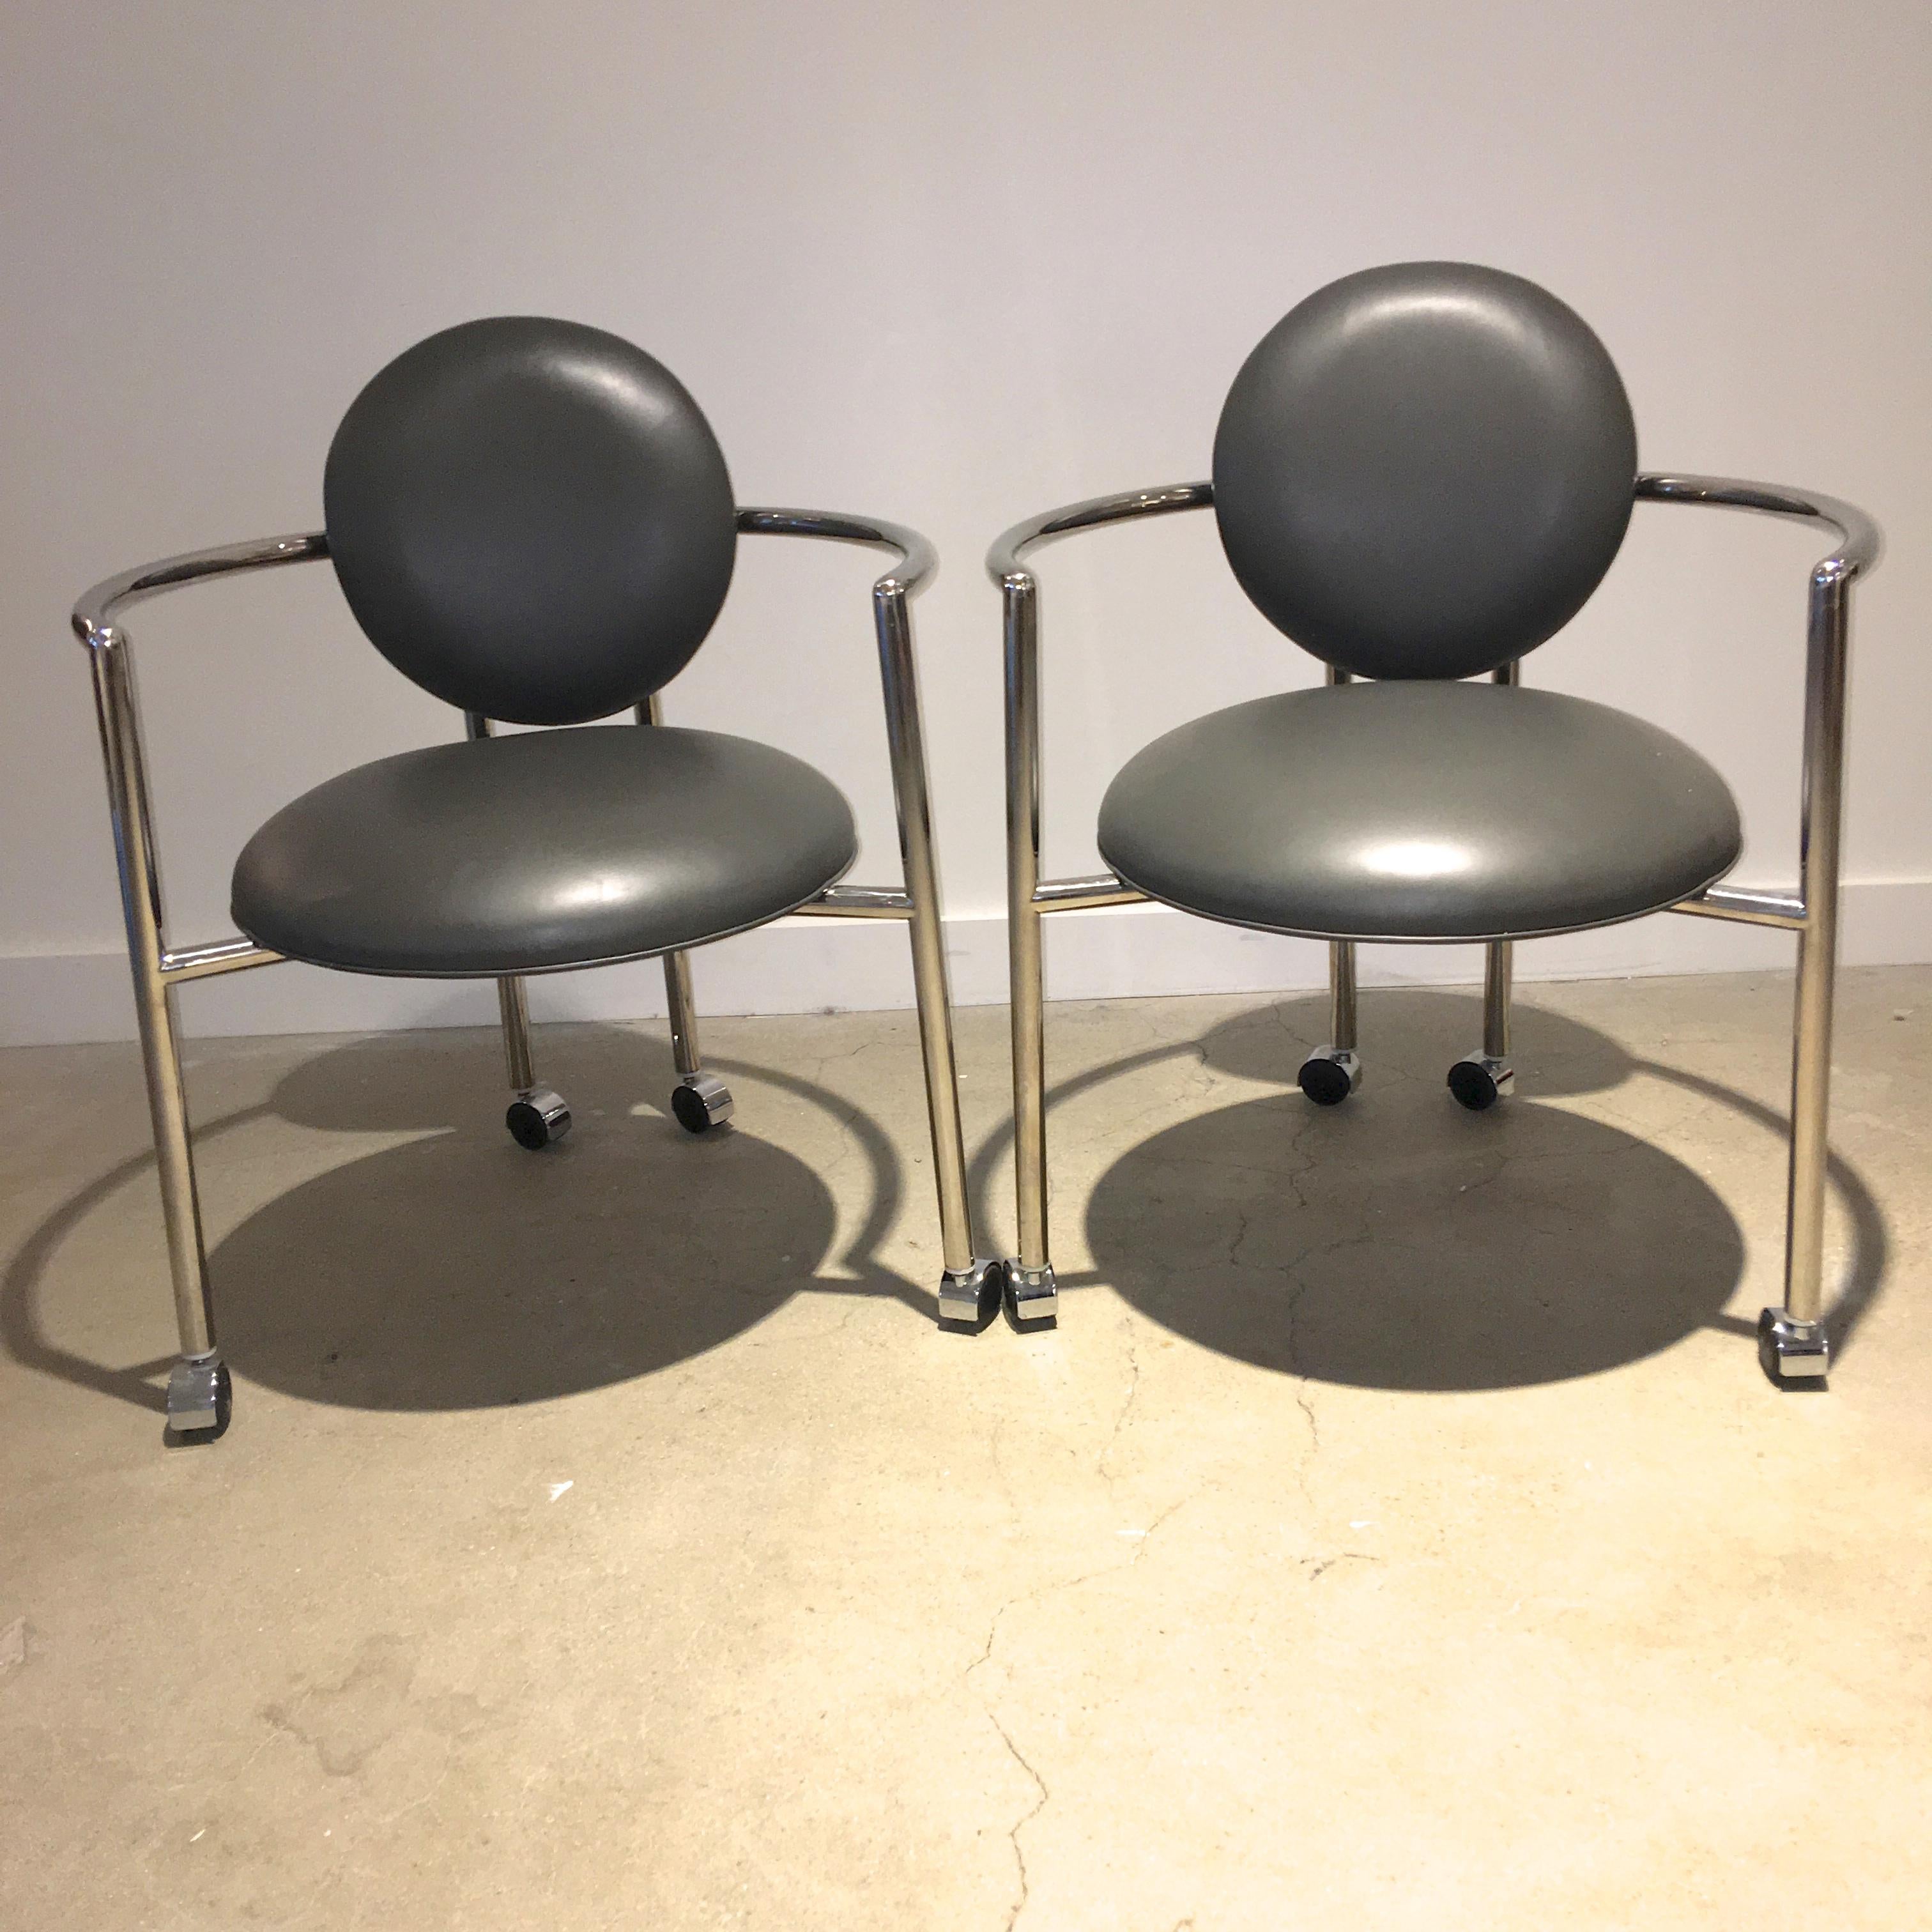 Pair of Moon Chairs by Stanley Jay Friedman for Brueton (Poliert)